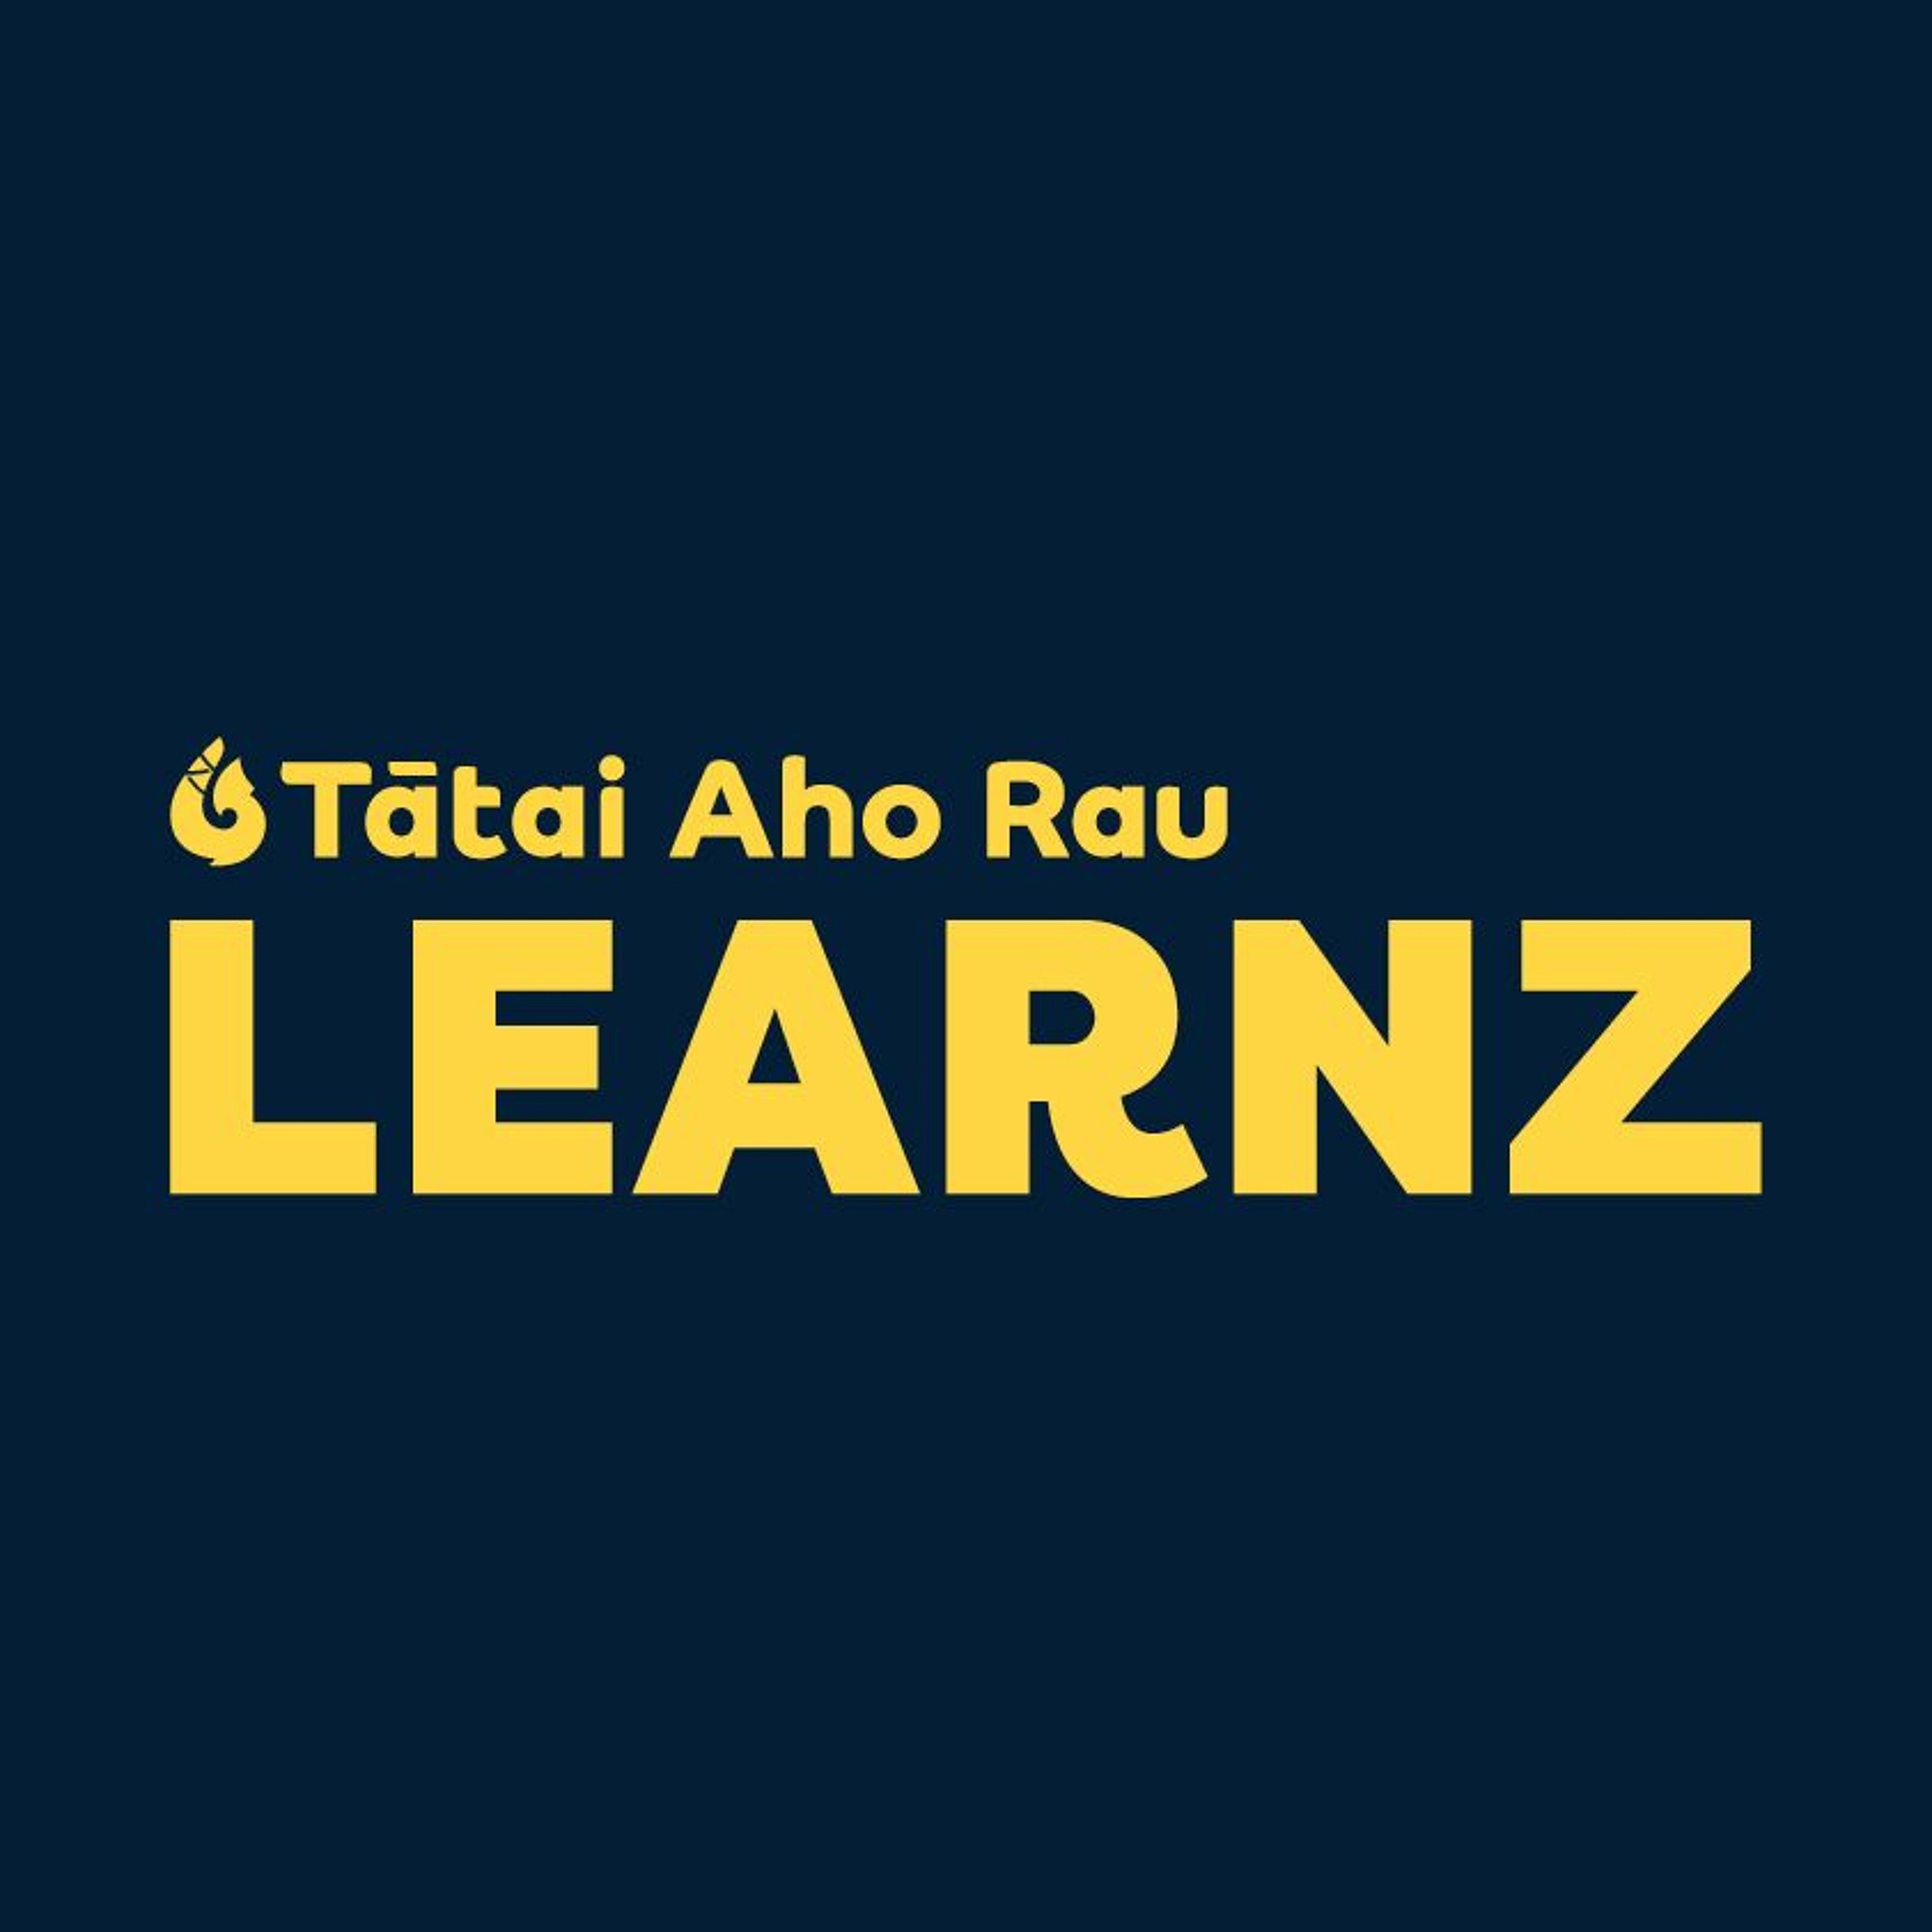 LEARNZ Wild Weather podcast 1 of 2